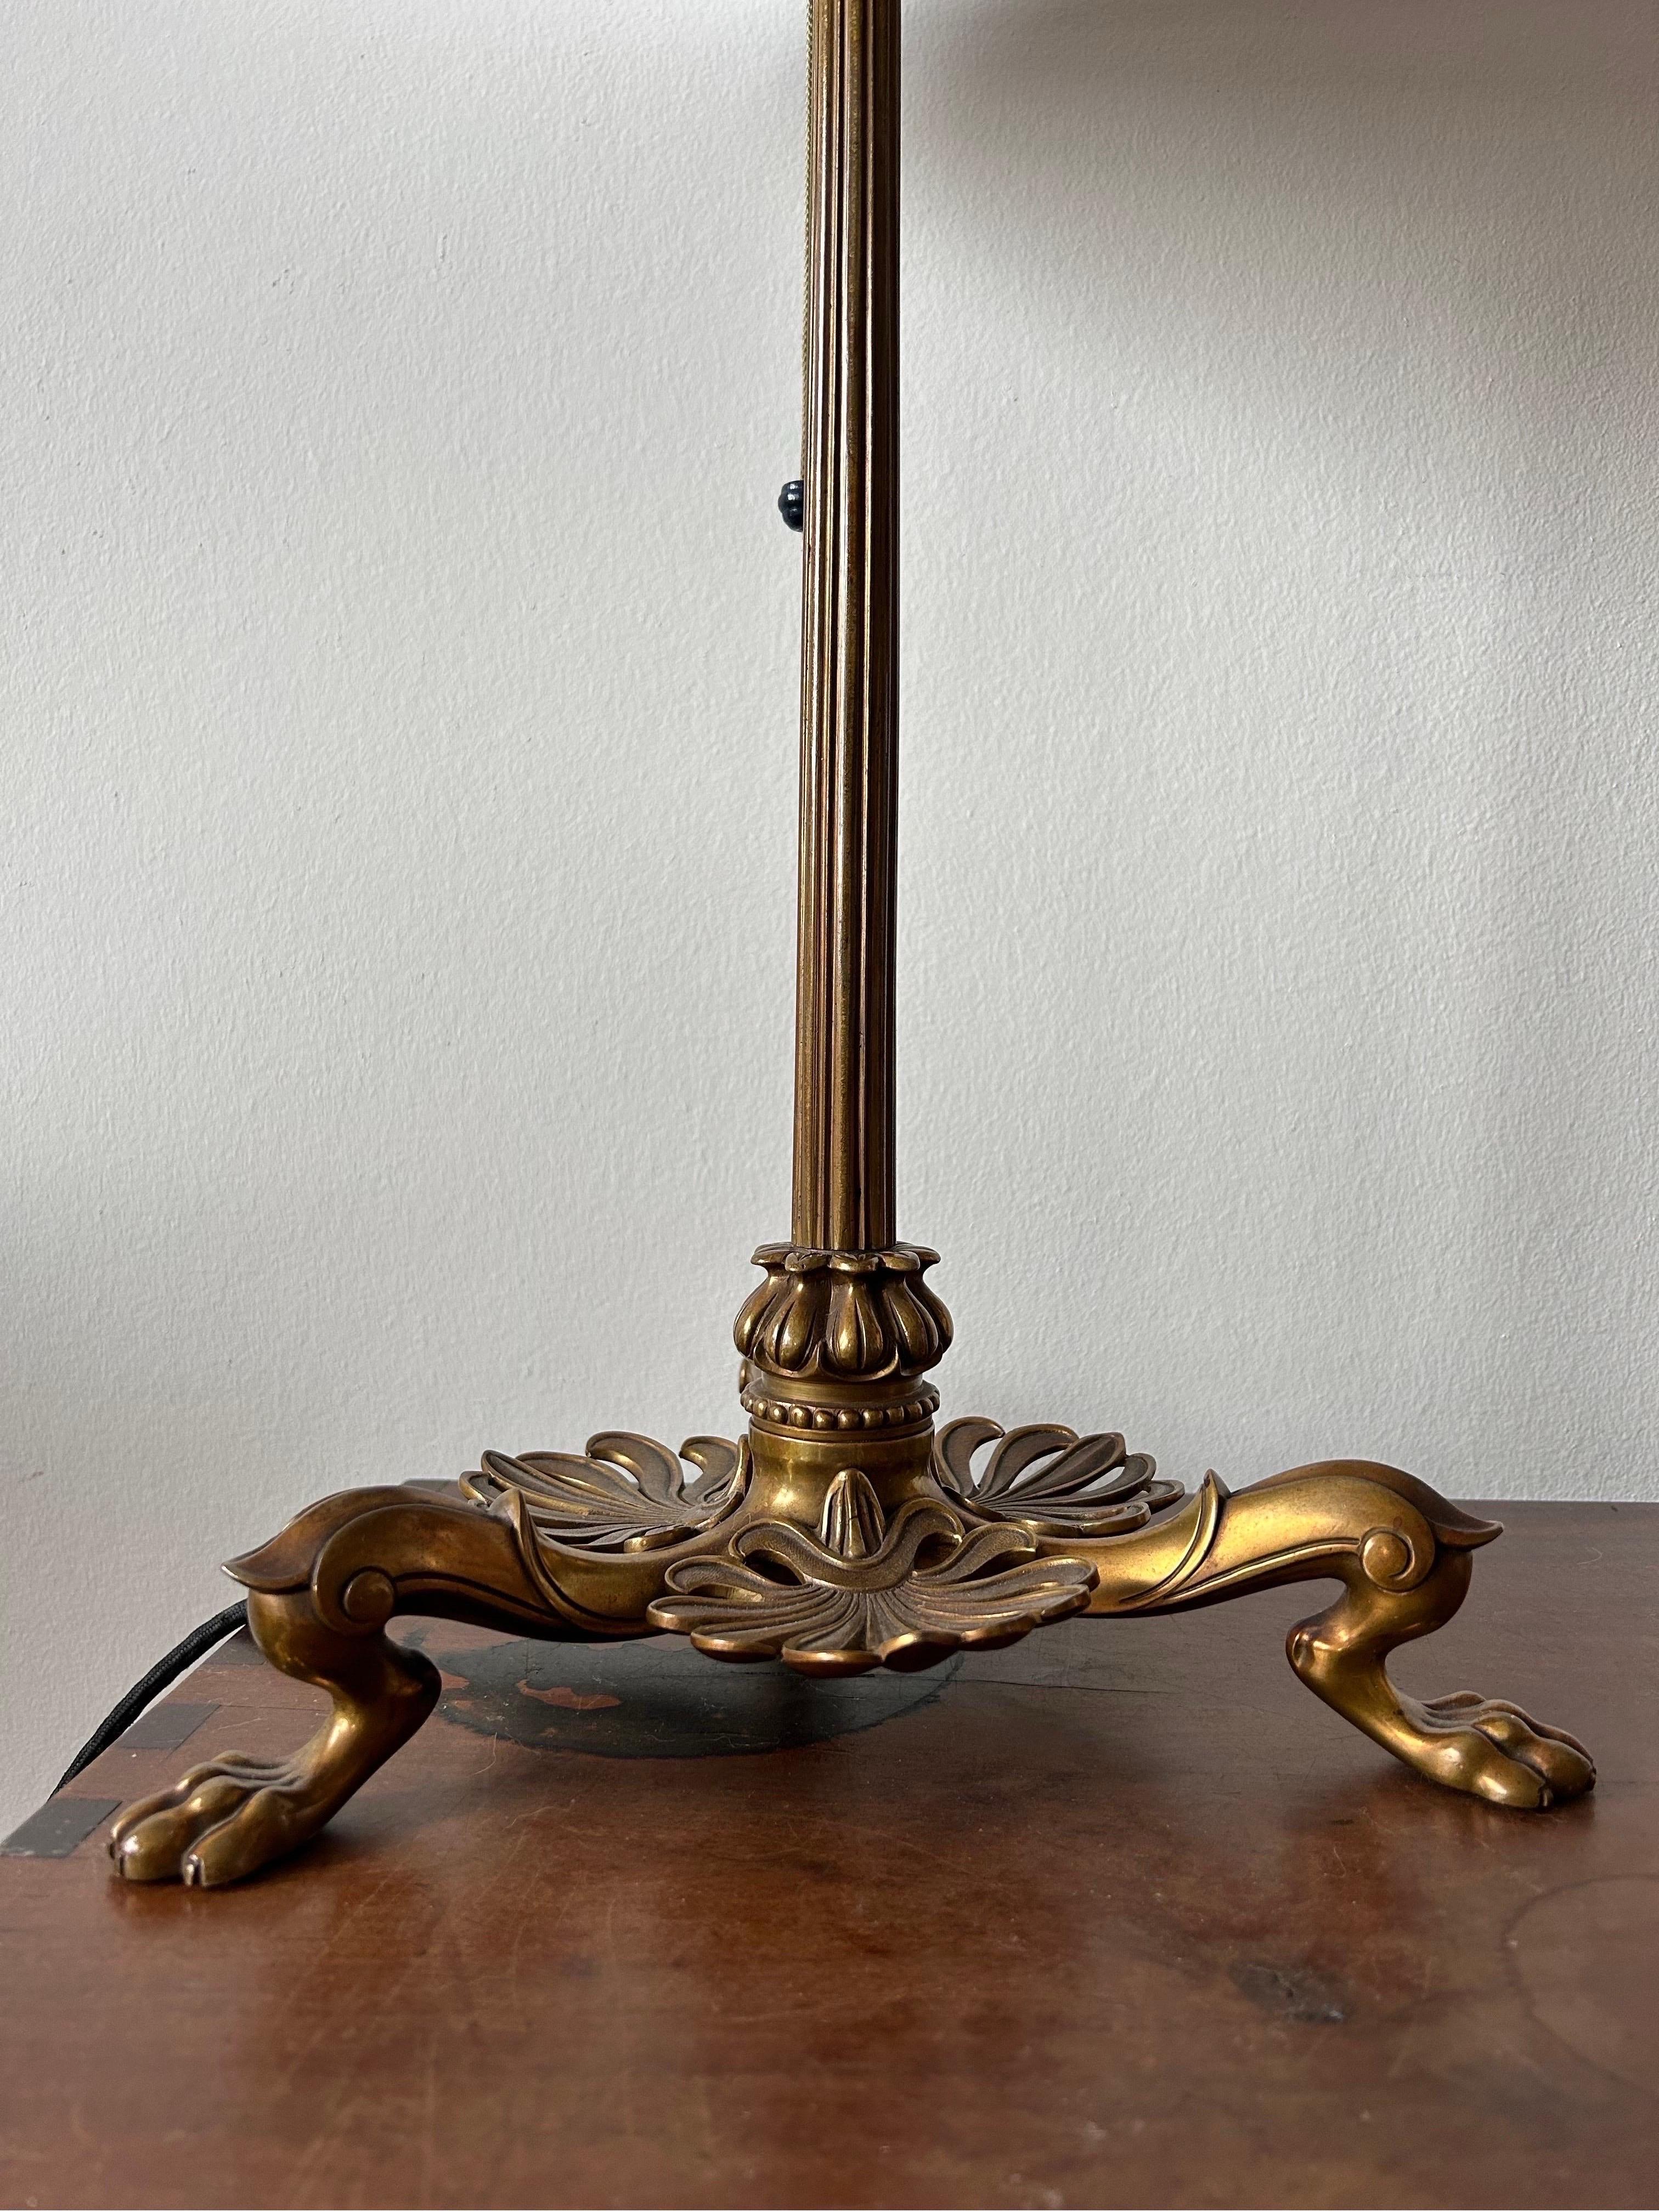 Rare Martin Gottlib Bindesbøll bronze table lamp, crafted in Denmark during the 1850s. A true testament to Scandinavian craftsmanship, this lamp showcases Bindesbøll’s renowned design aesthetic and attention to detail, with clear references to the